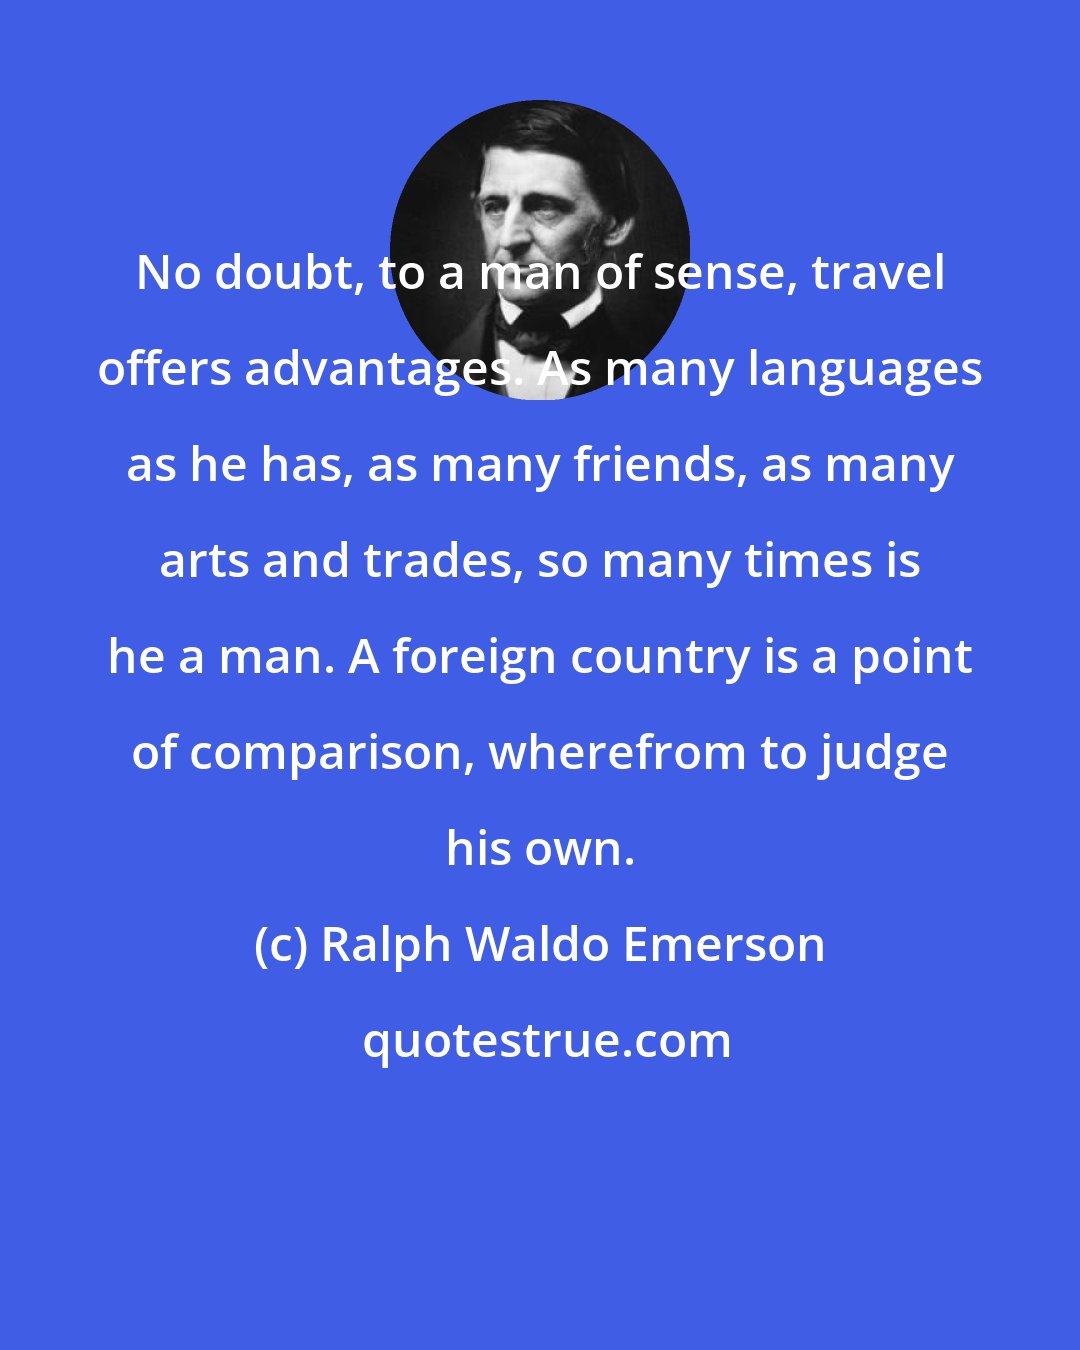 Ralph Waldo Emerson: No doubt, to a man of sense, travel offers advantages. As many languages as he has, as many friends, as many arts and trades, so many times is he a man. A foreign country is a point of comparison, wherefrom to judge his own.